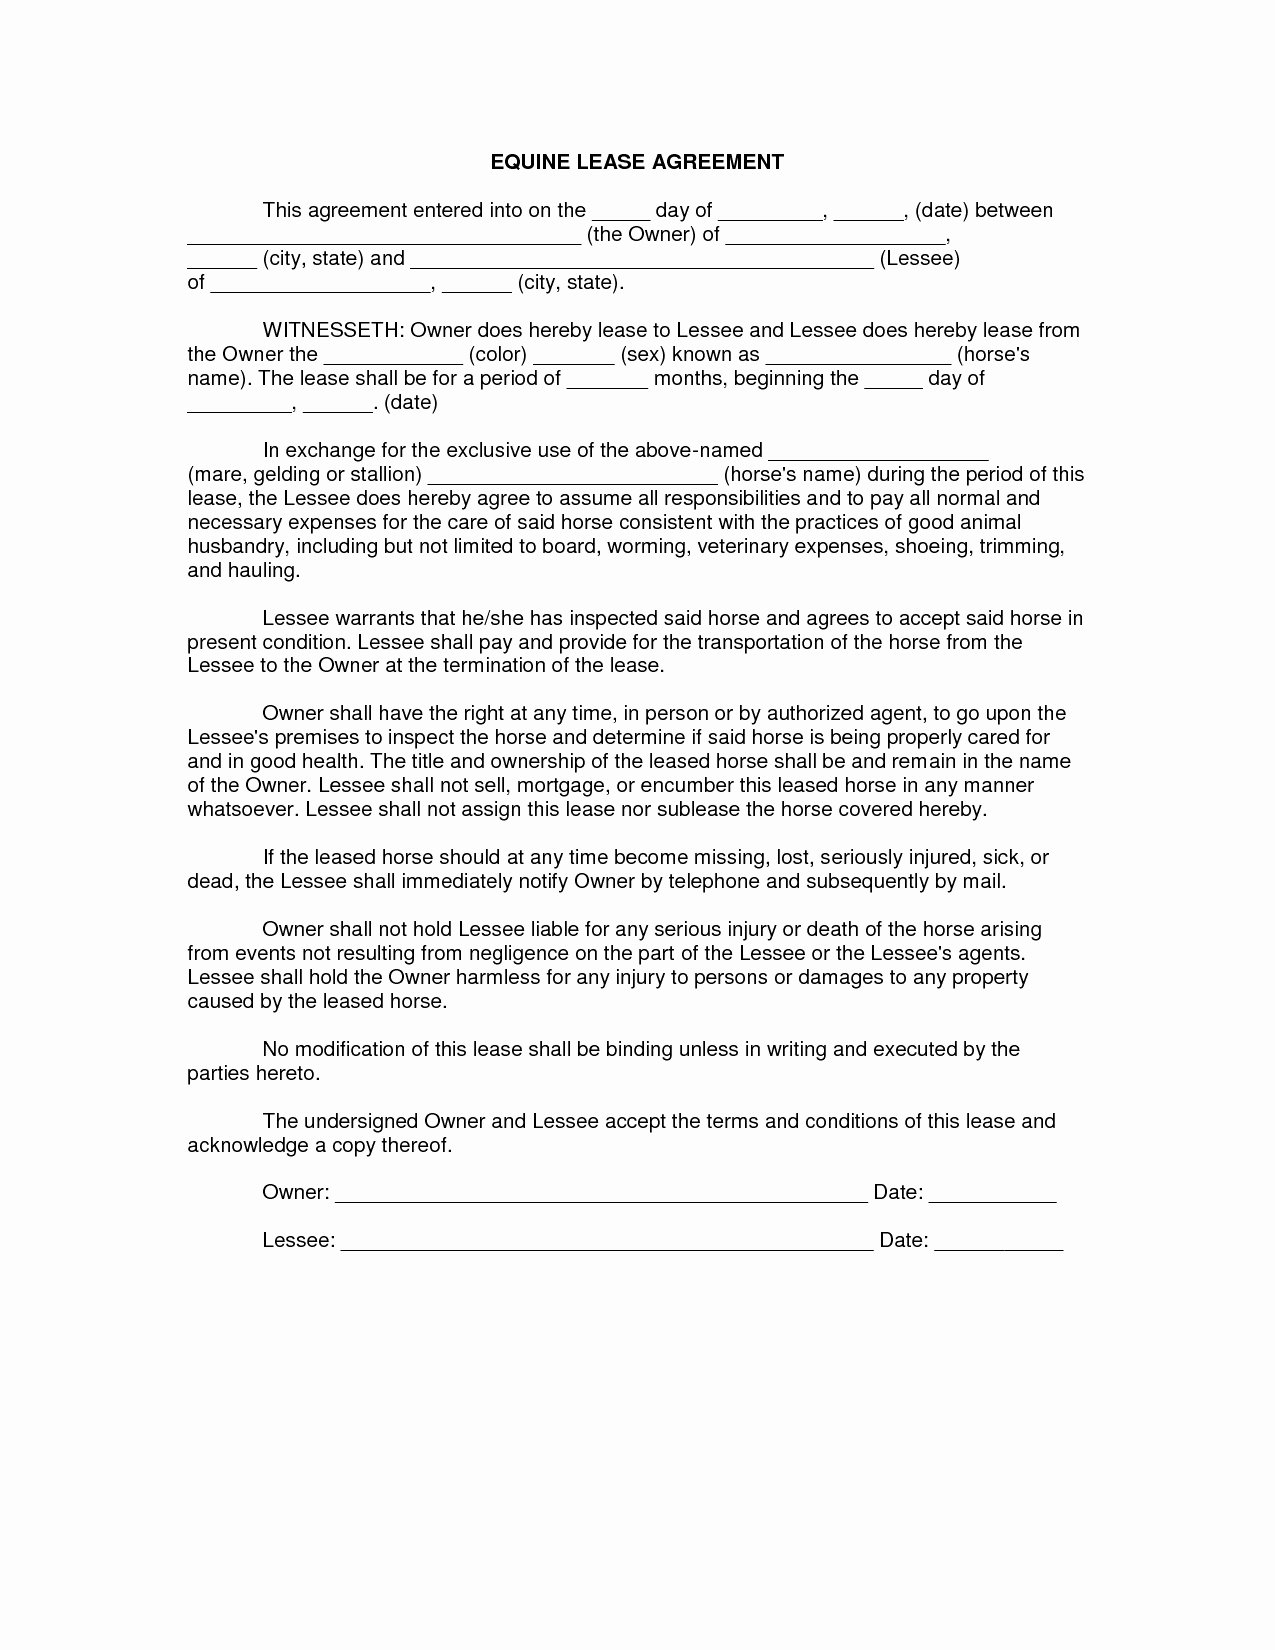 Horse Lease Agreement Template Inspirational Equine Lease Agreement